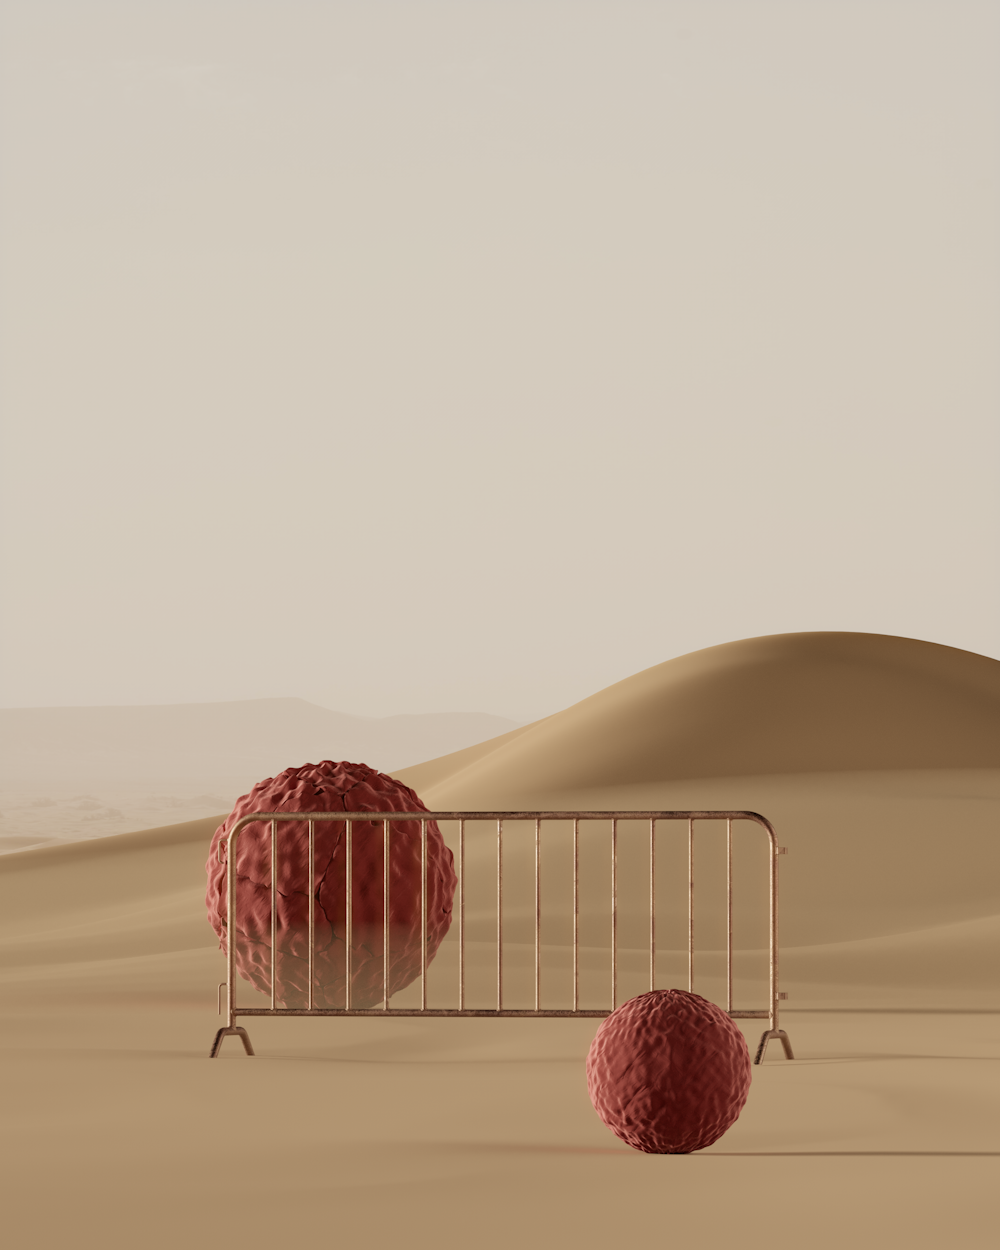 two red balls in a cage in the desert